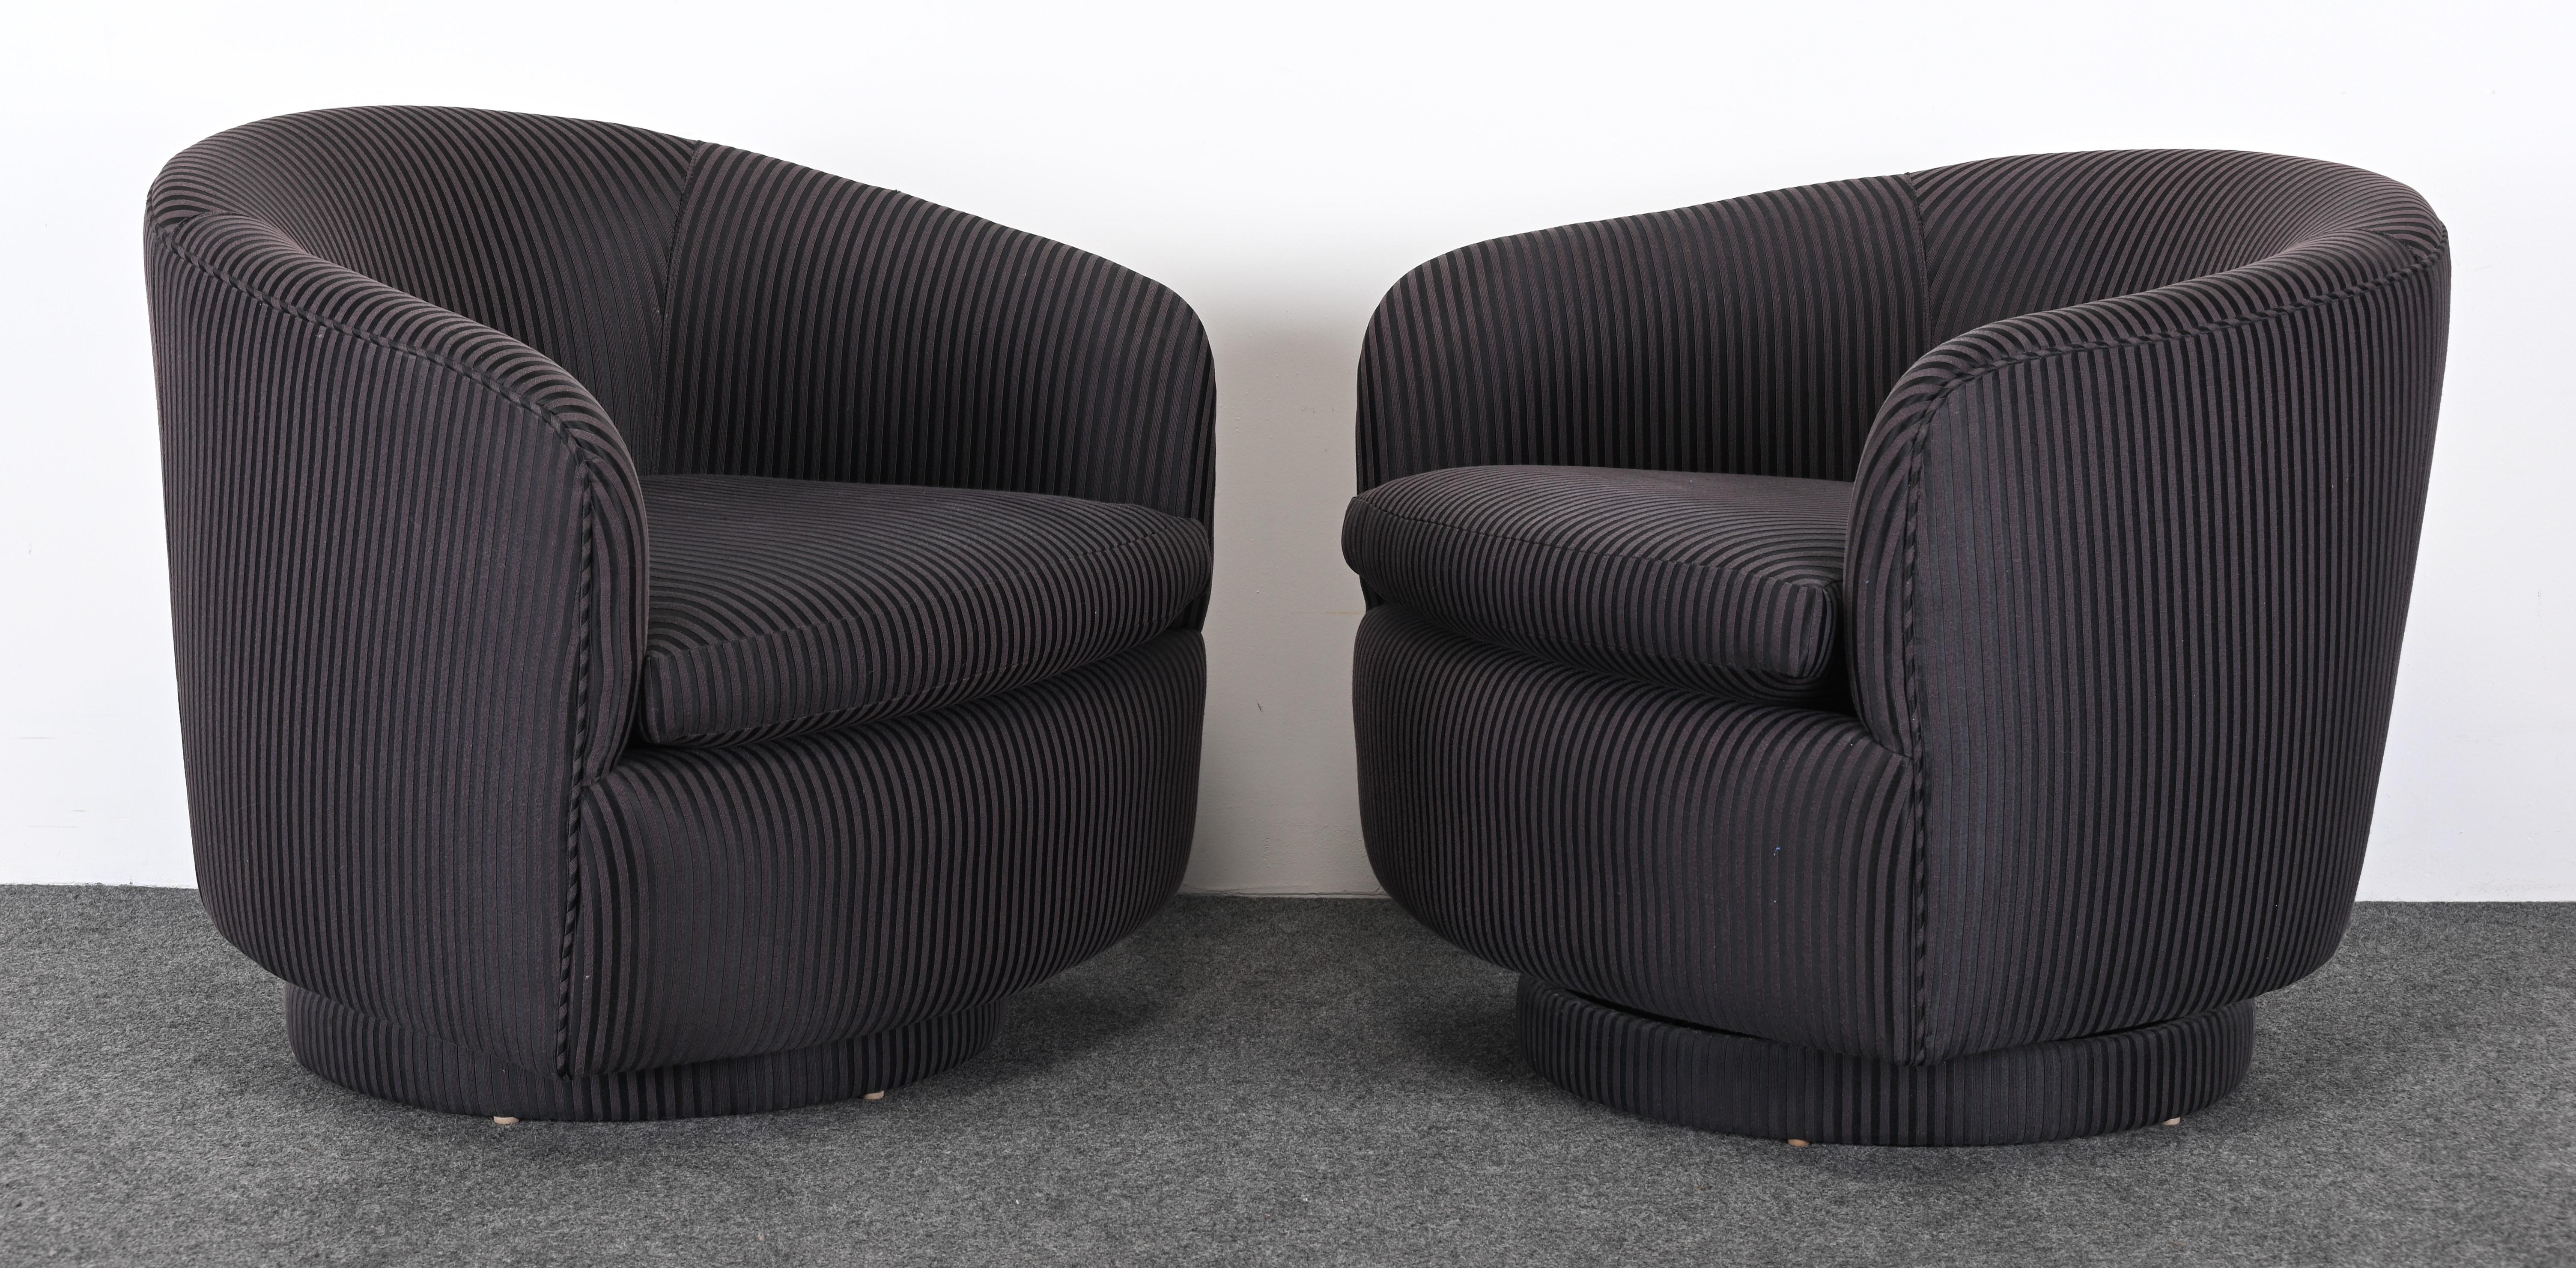 American Pair of Swivel Chairs by Milo Baughman for Thayer Coggin, 1990 For Sale